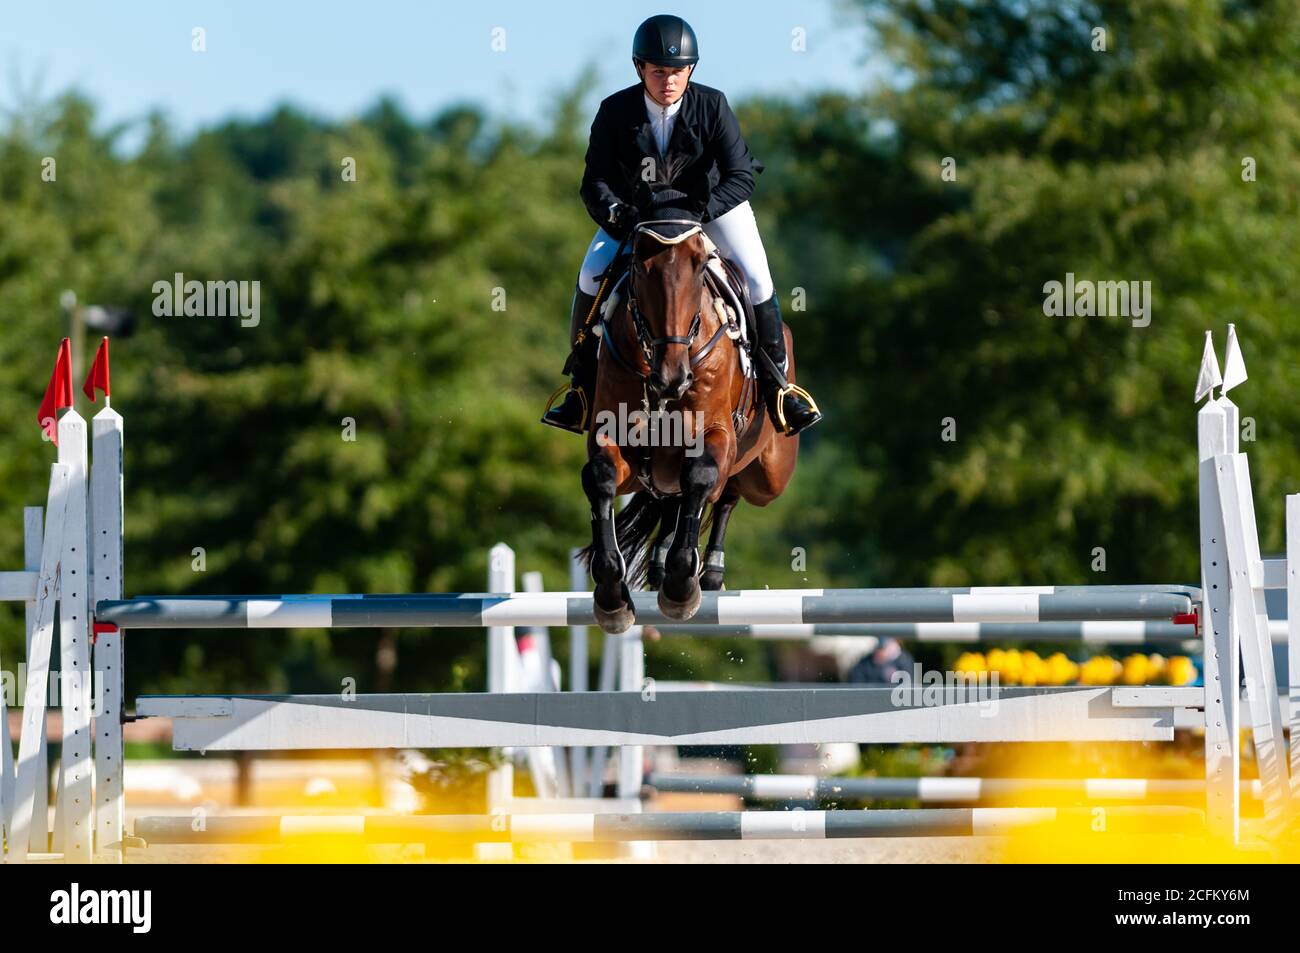 September 6, 2020, Raeford, North Carolina, USA: Sept. 6, 2020 - Raeford, North Carolina, USA - BRITTANY CRANDALL riding Cooley Almighty competes in show jumping at the Five Points Horse Trials, Sept. 5, 2020 at Carolina Horse Park in Raeford, N.C. The horse trial event consists of three distinct tests - dressage, cross-country, and show jumping, usually taking place on one or two days. The competitors must ride the same horse throughout each event. The Five Points Horse Trials attracts riders and their horses from across the eastern United States. (Credit Image: © Timothy L. Hale/ZUMA Wire) Stock Photo